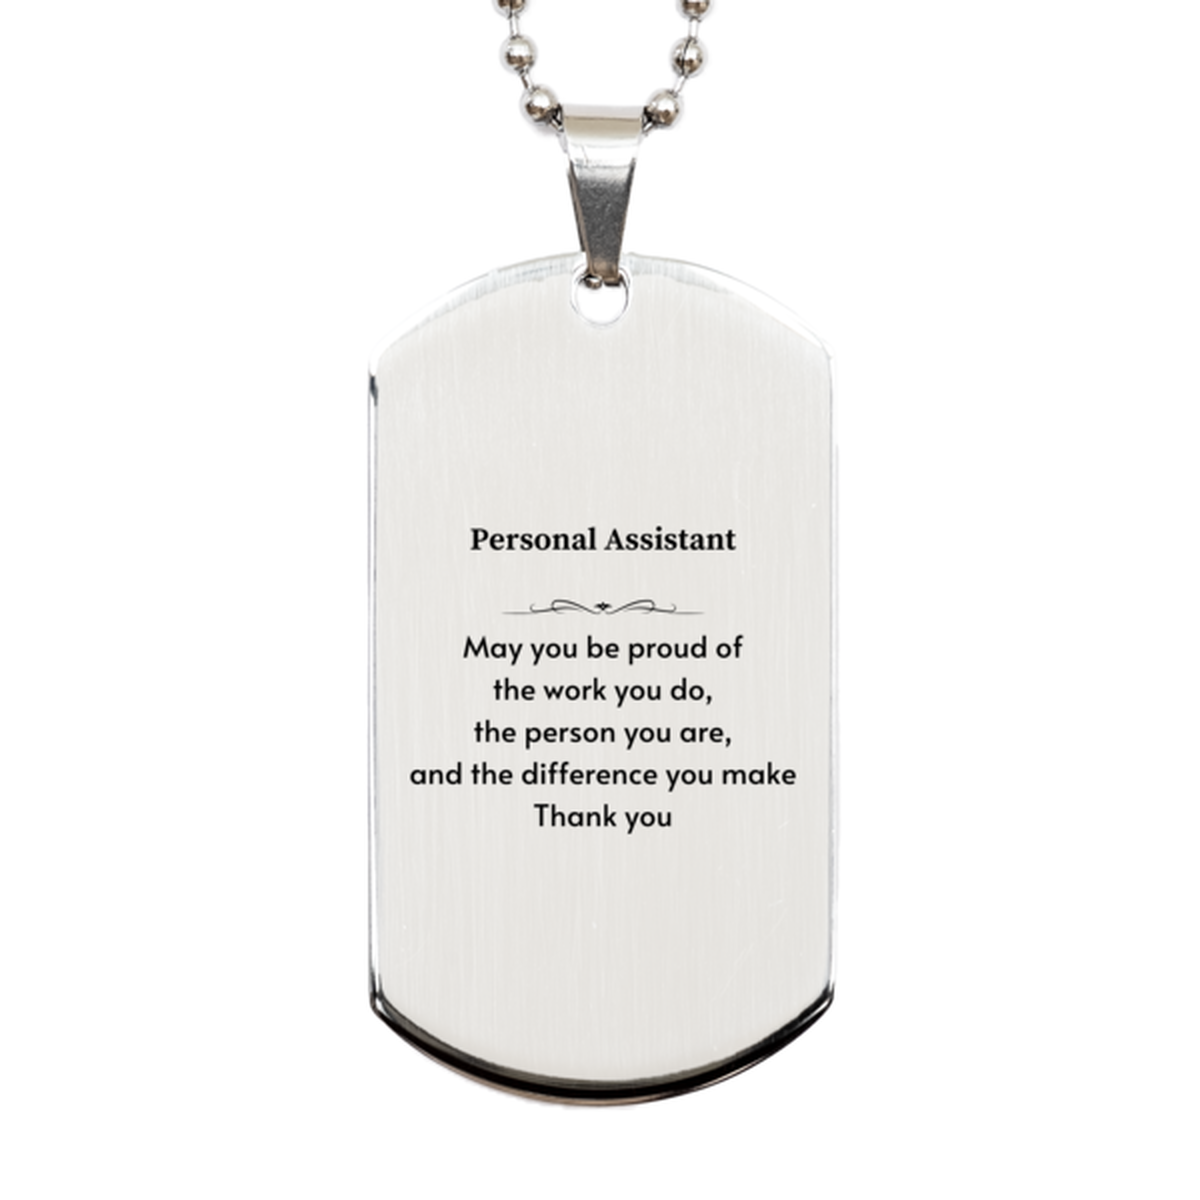 Heartwarming Silver Dog Tag Retirement Coworkers Gifts for Personal Assistant, Personal Assistant May You be proud of the work you do, the person you are Gifts for Boss Men Women Friends